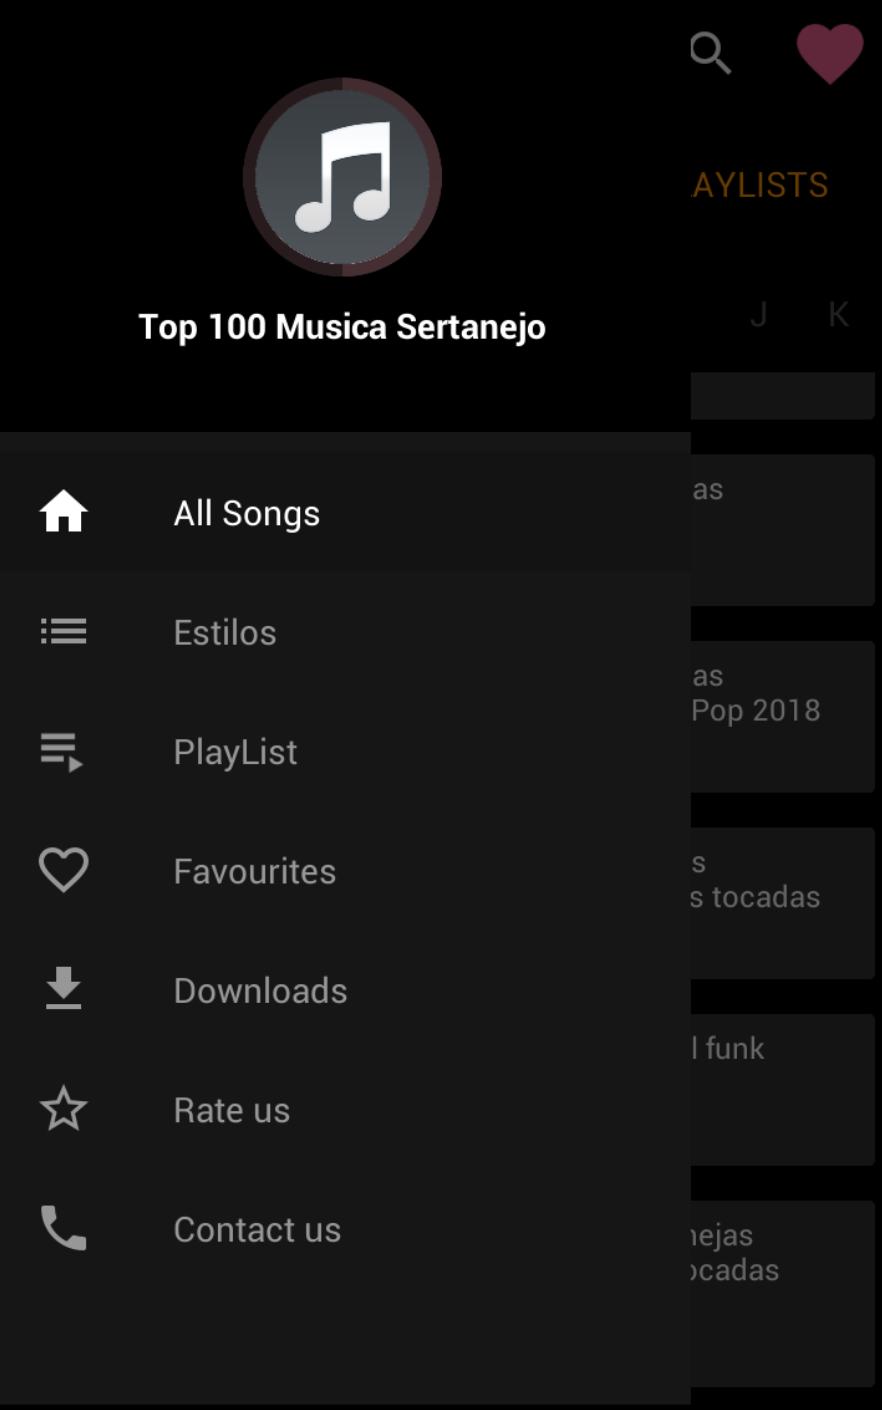 Top 100 Musica Sertanejo for Android - APK Download